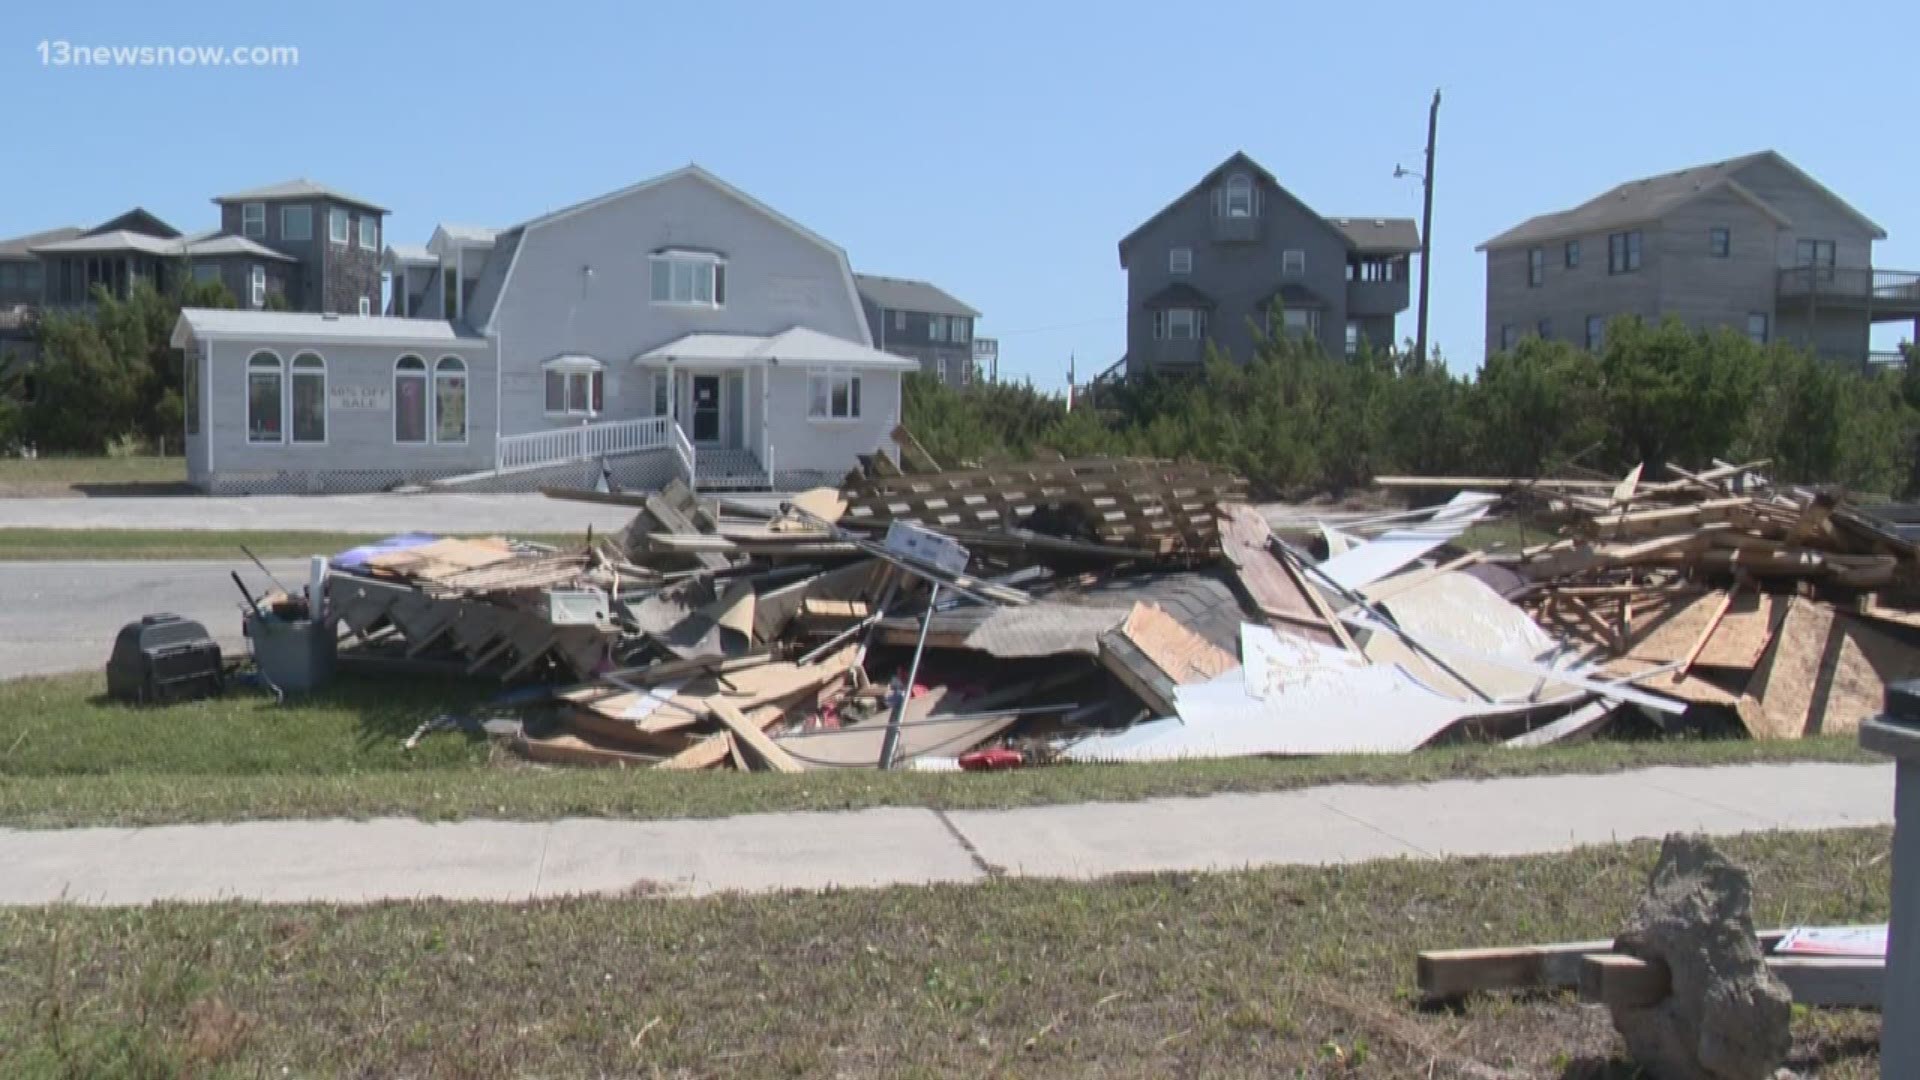 Community members are continuing the cleanup process in Hatteras after Hurricane Dorian tore through the area. Officials said the worst of the damage was at Cape Hatteras Secondary School where part of the roof collapsed.